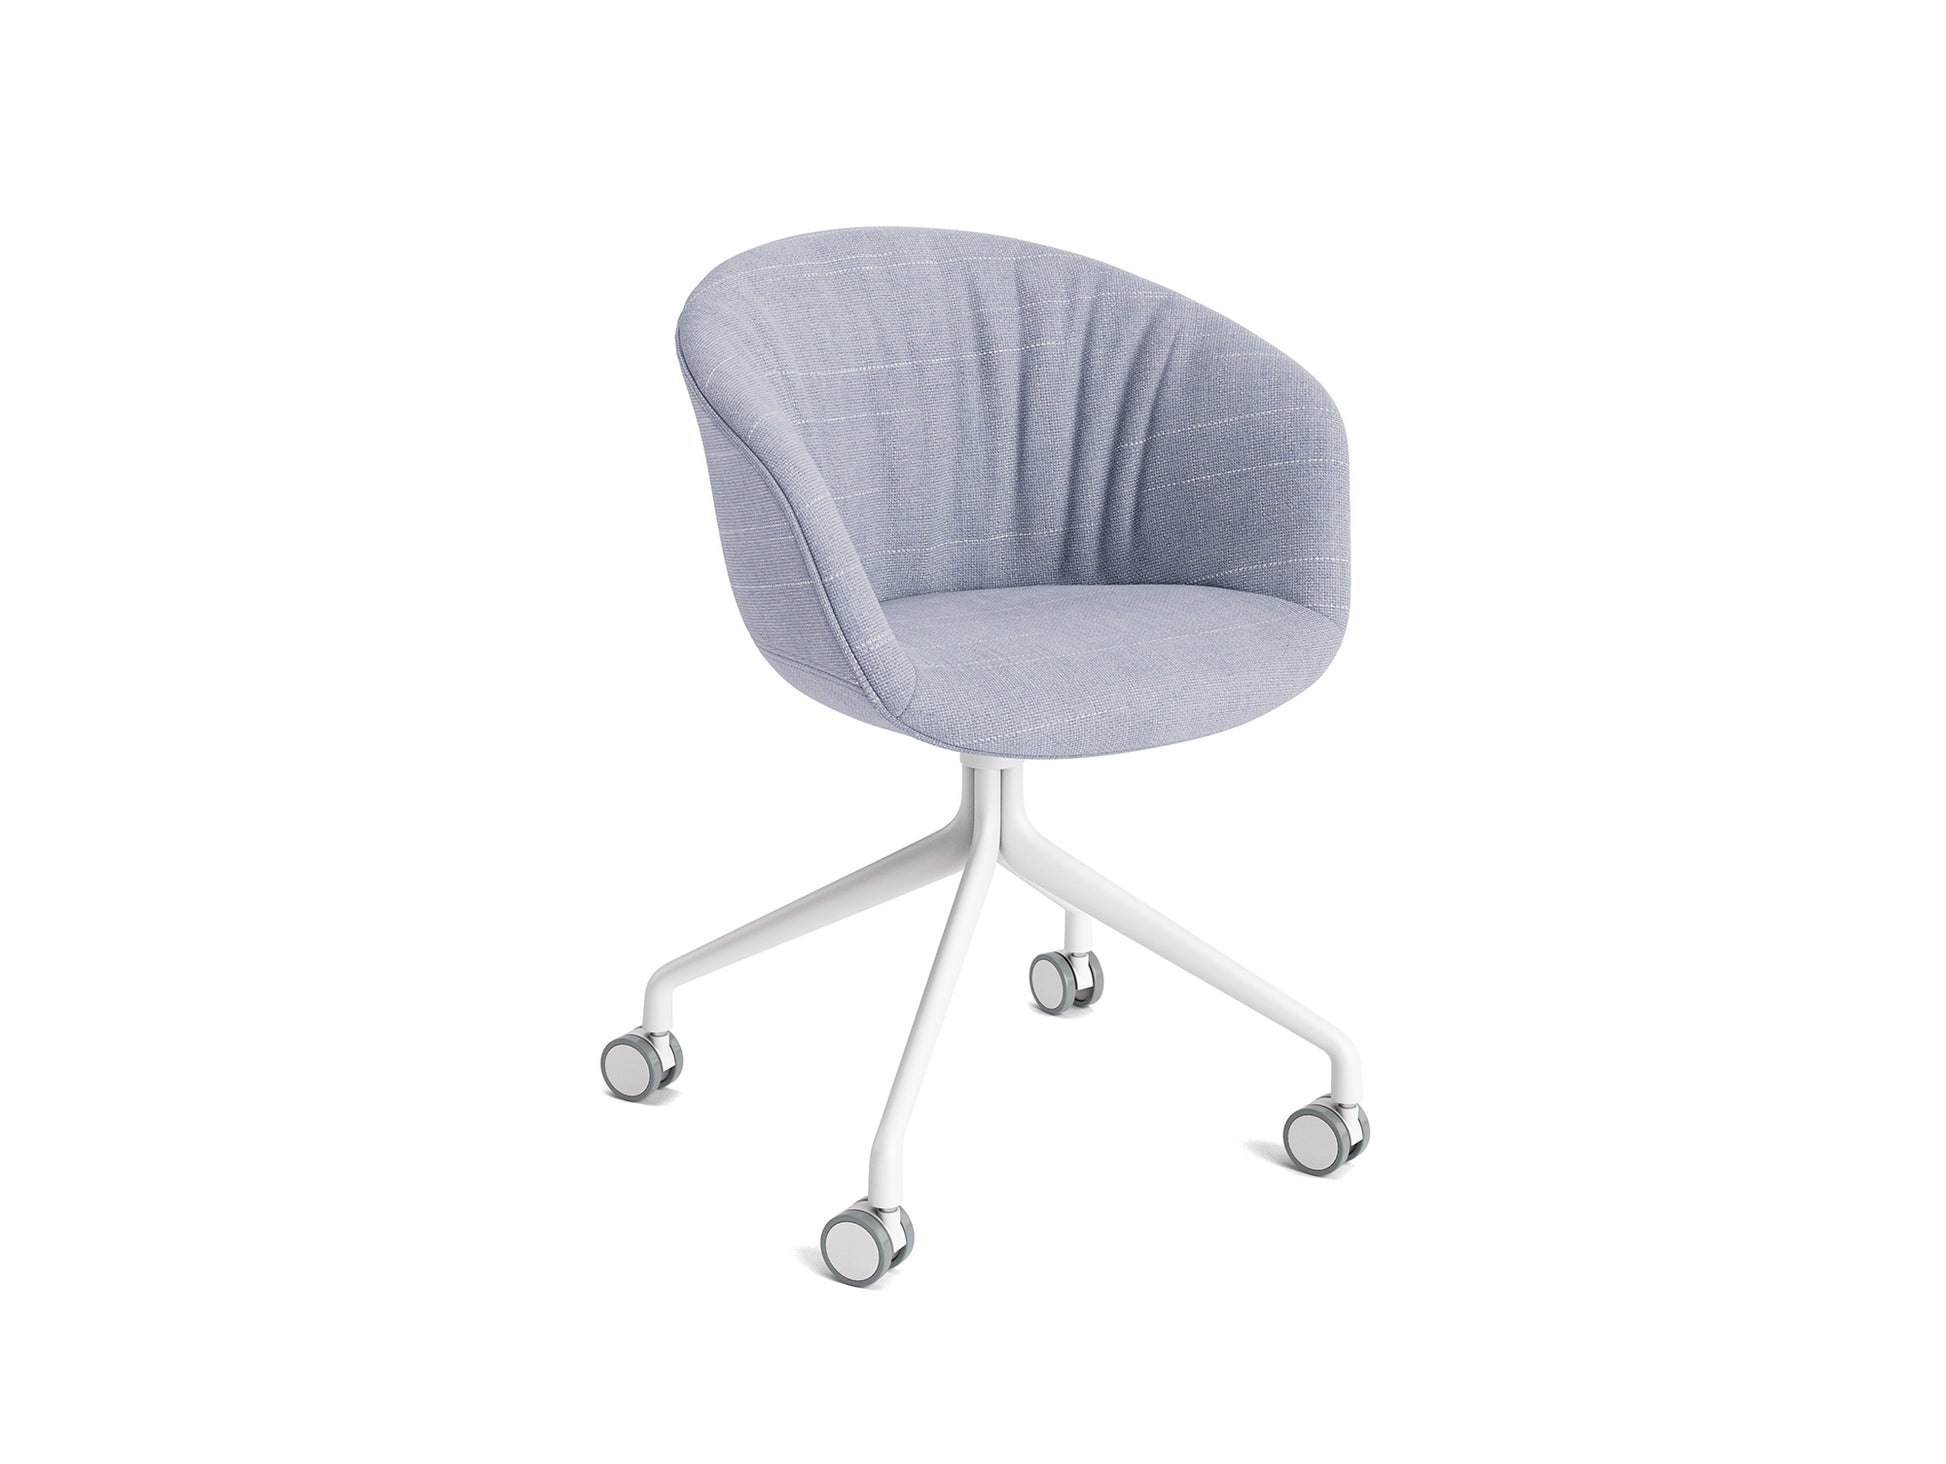 About A Chair AAC 25 Soft by HAY - Random Fade Lilac / White Powder Coated Aluminium